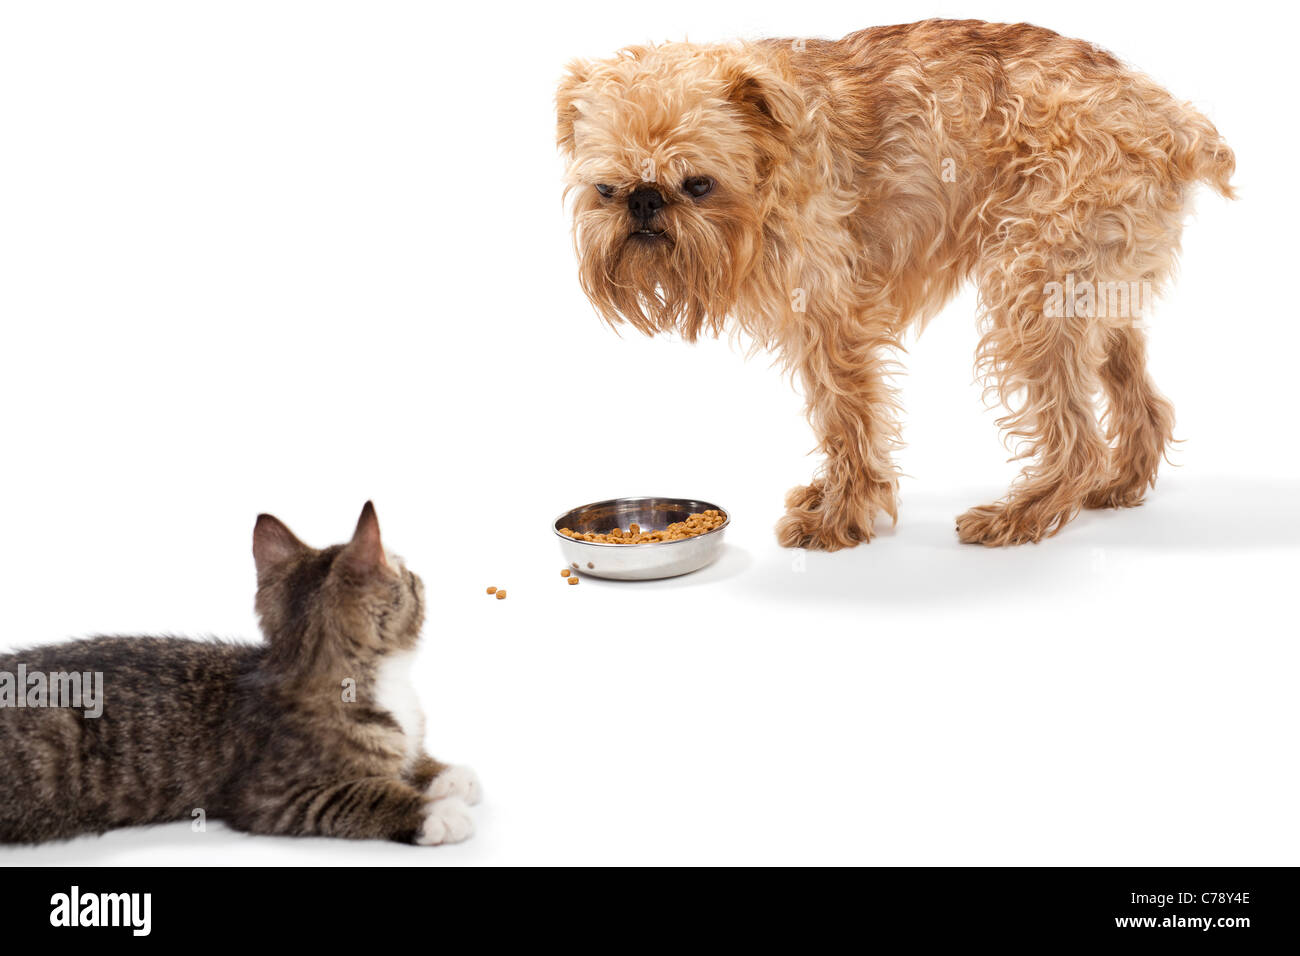 Kitten and puppy share food, isolated on white background Stock Photo